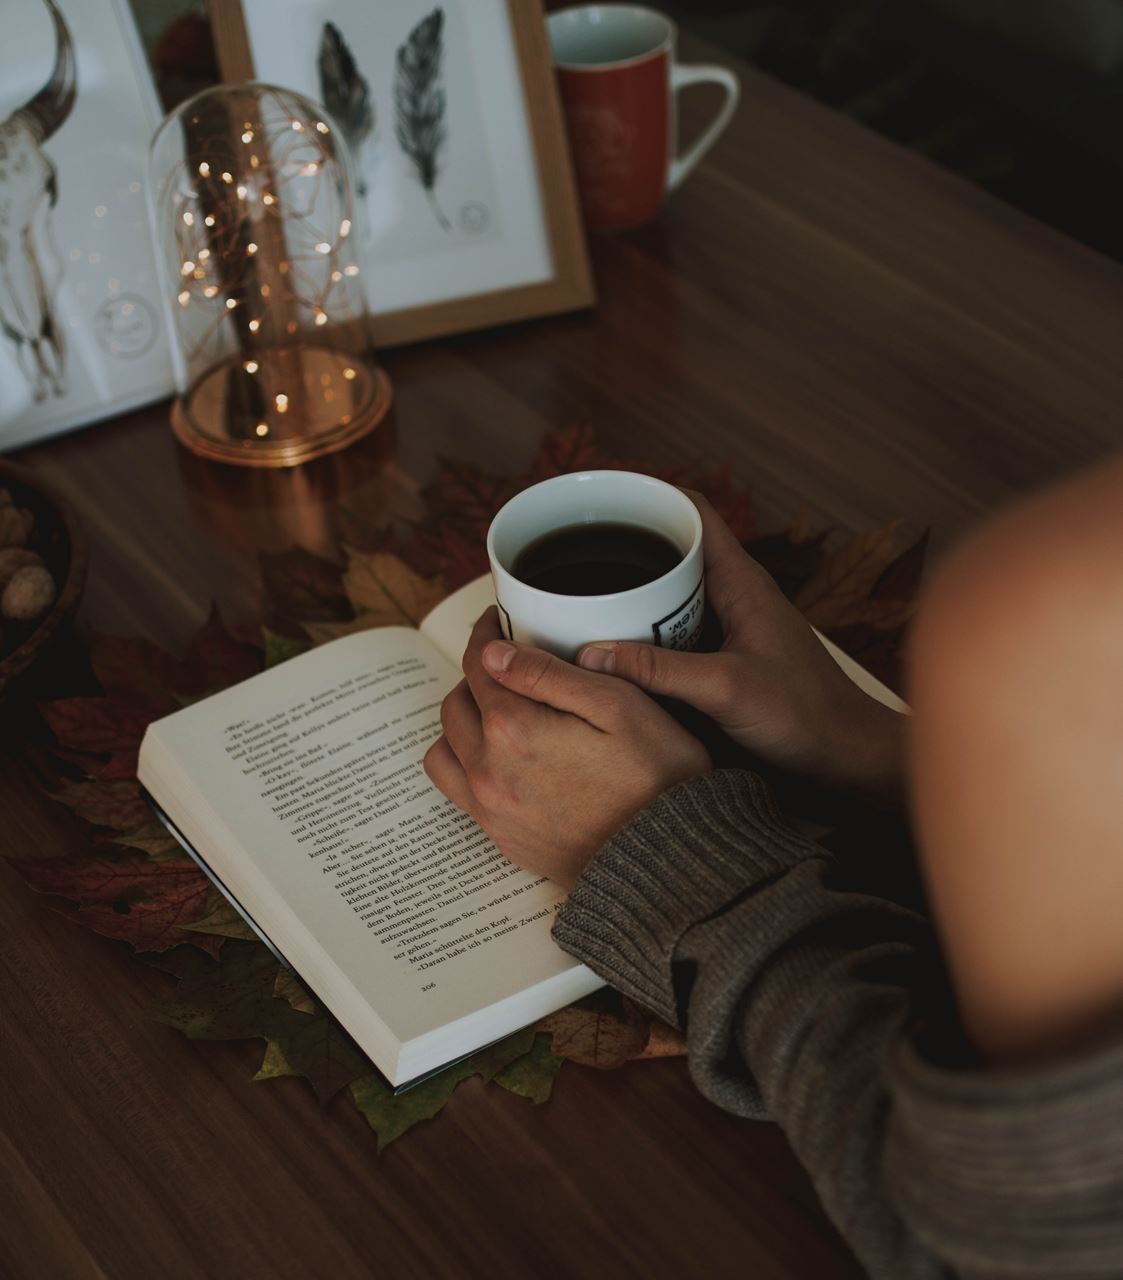 Hands holding cup of coffee on open book